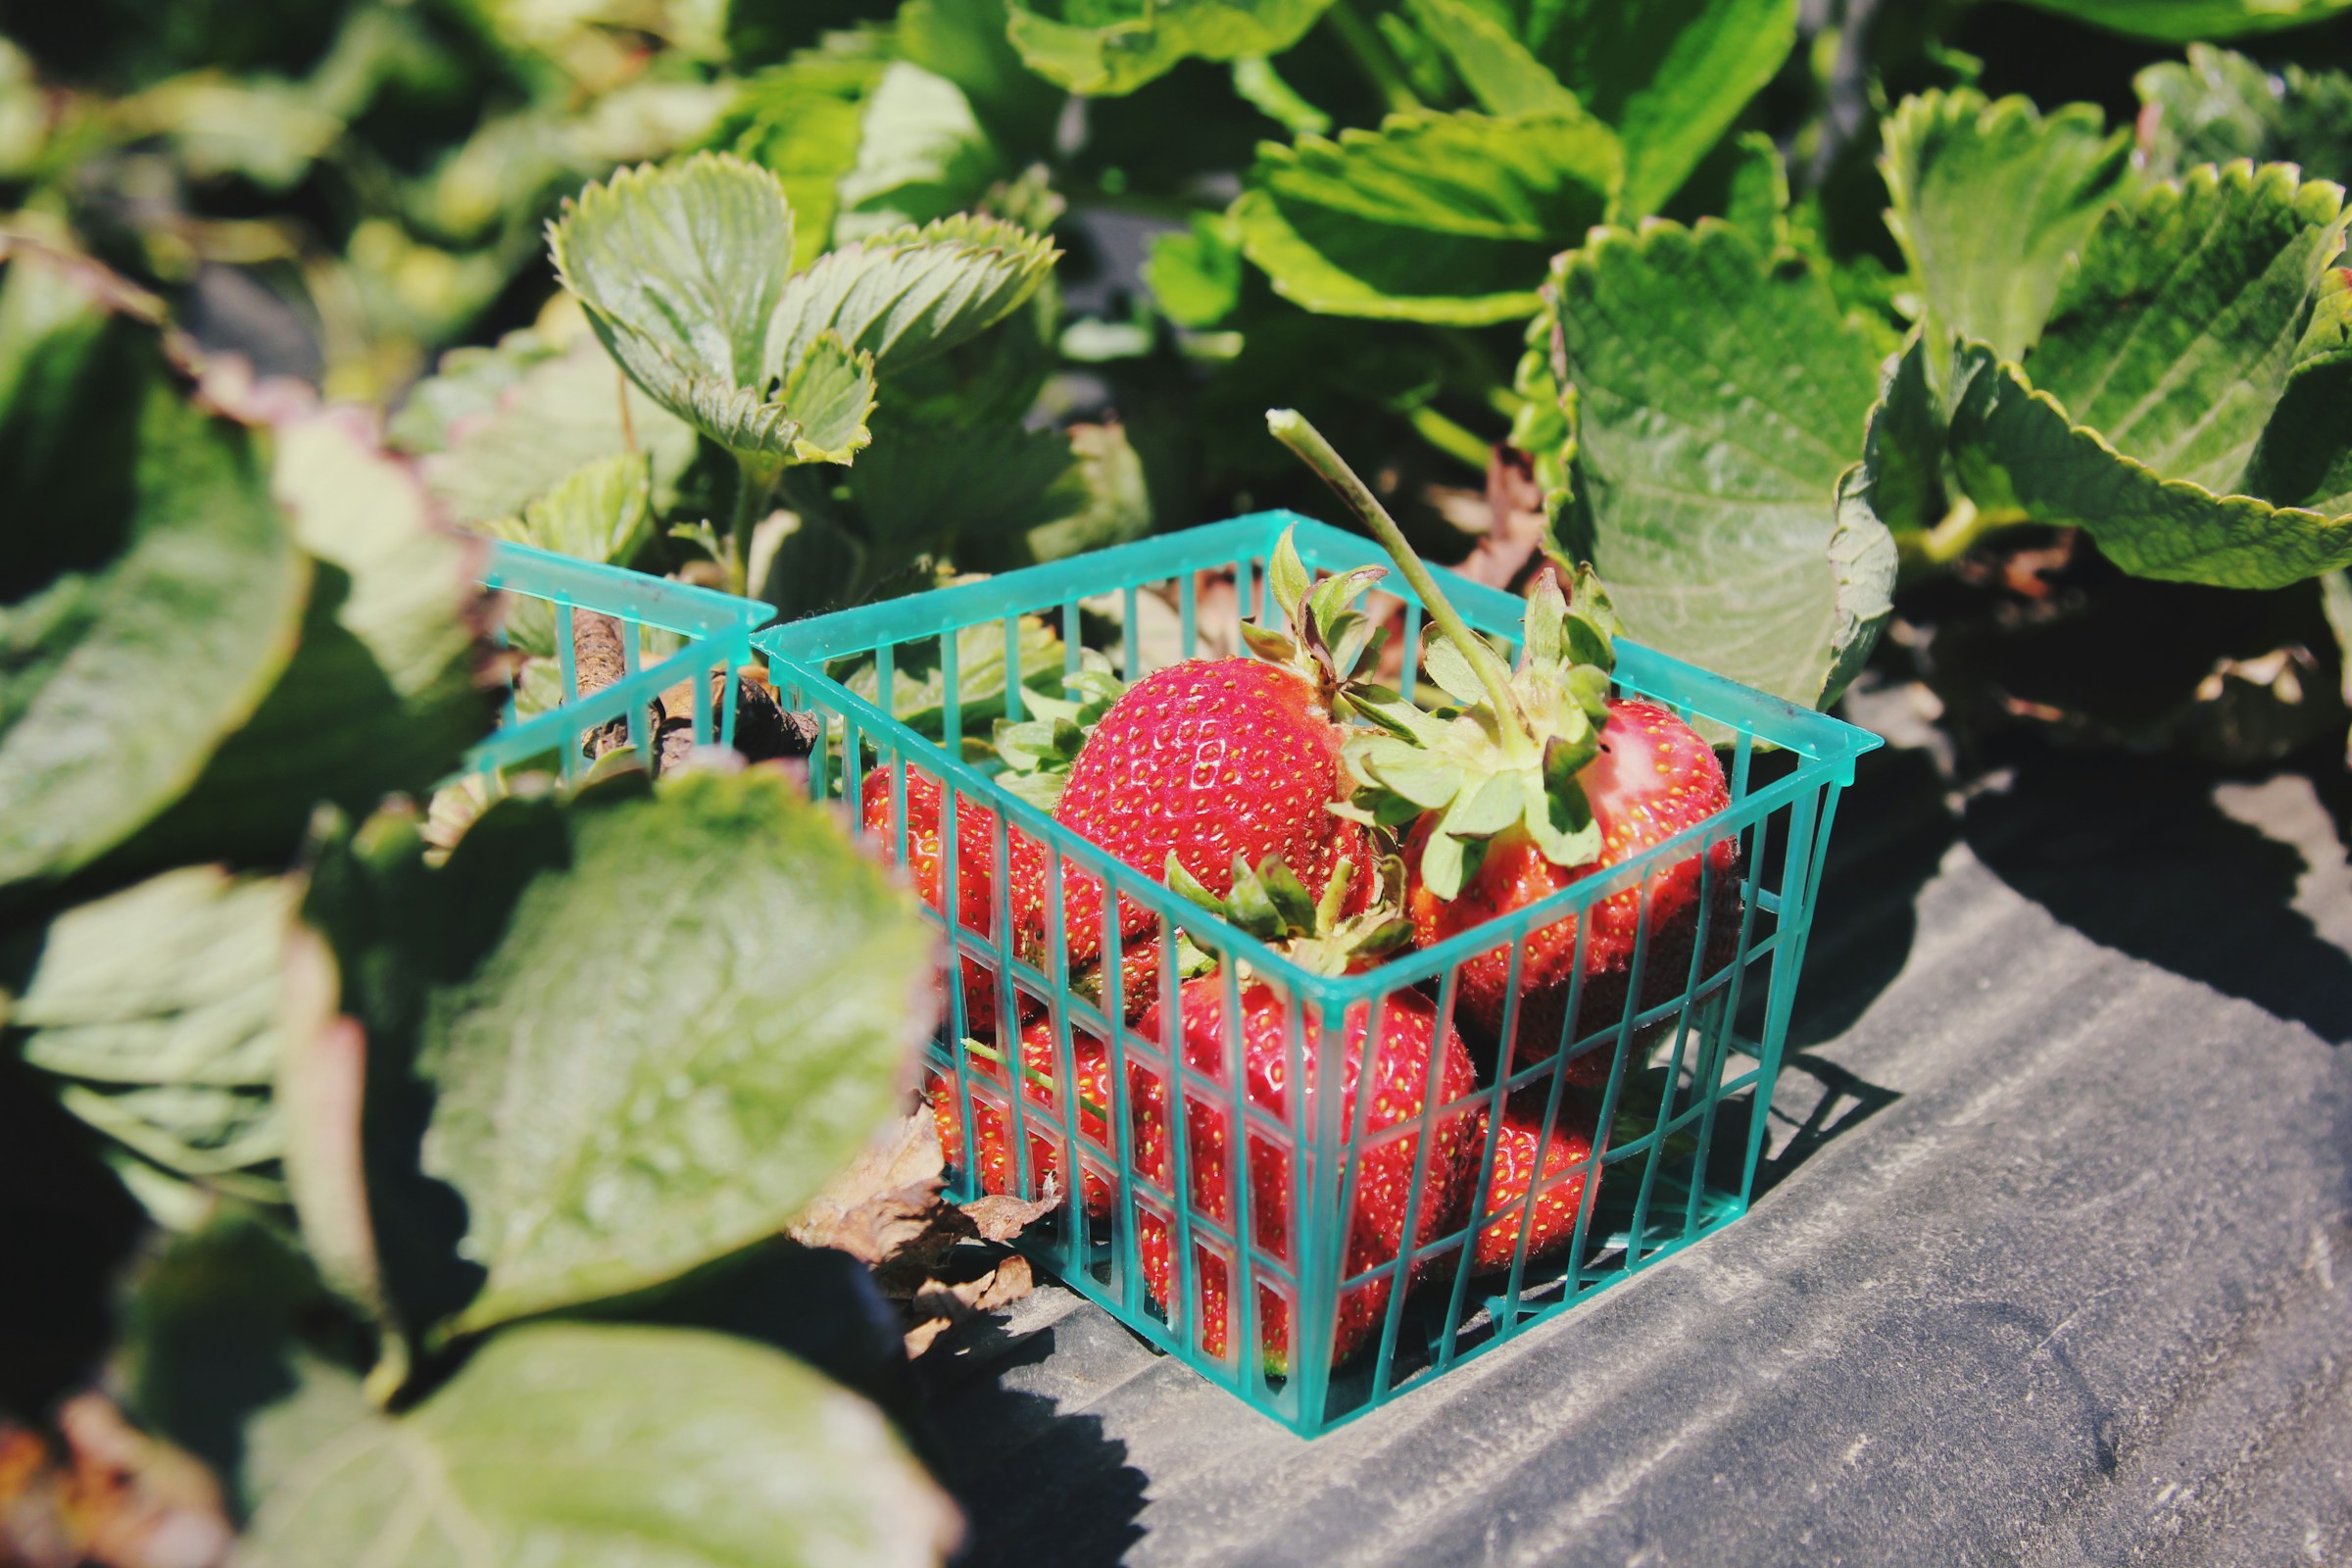 A container of strawberries | Source: Unsplash